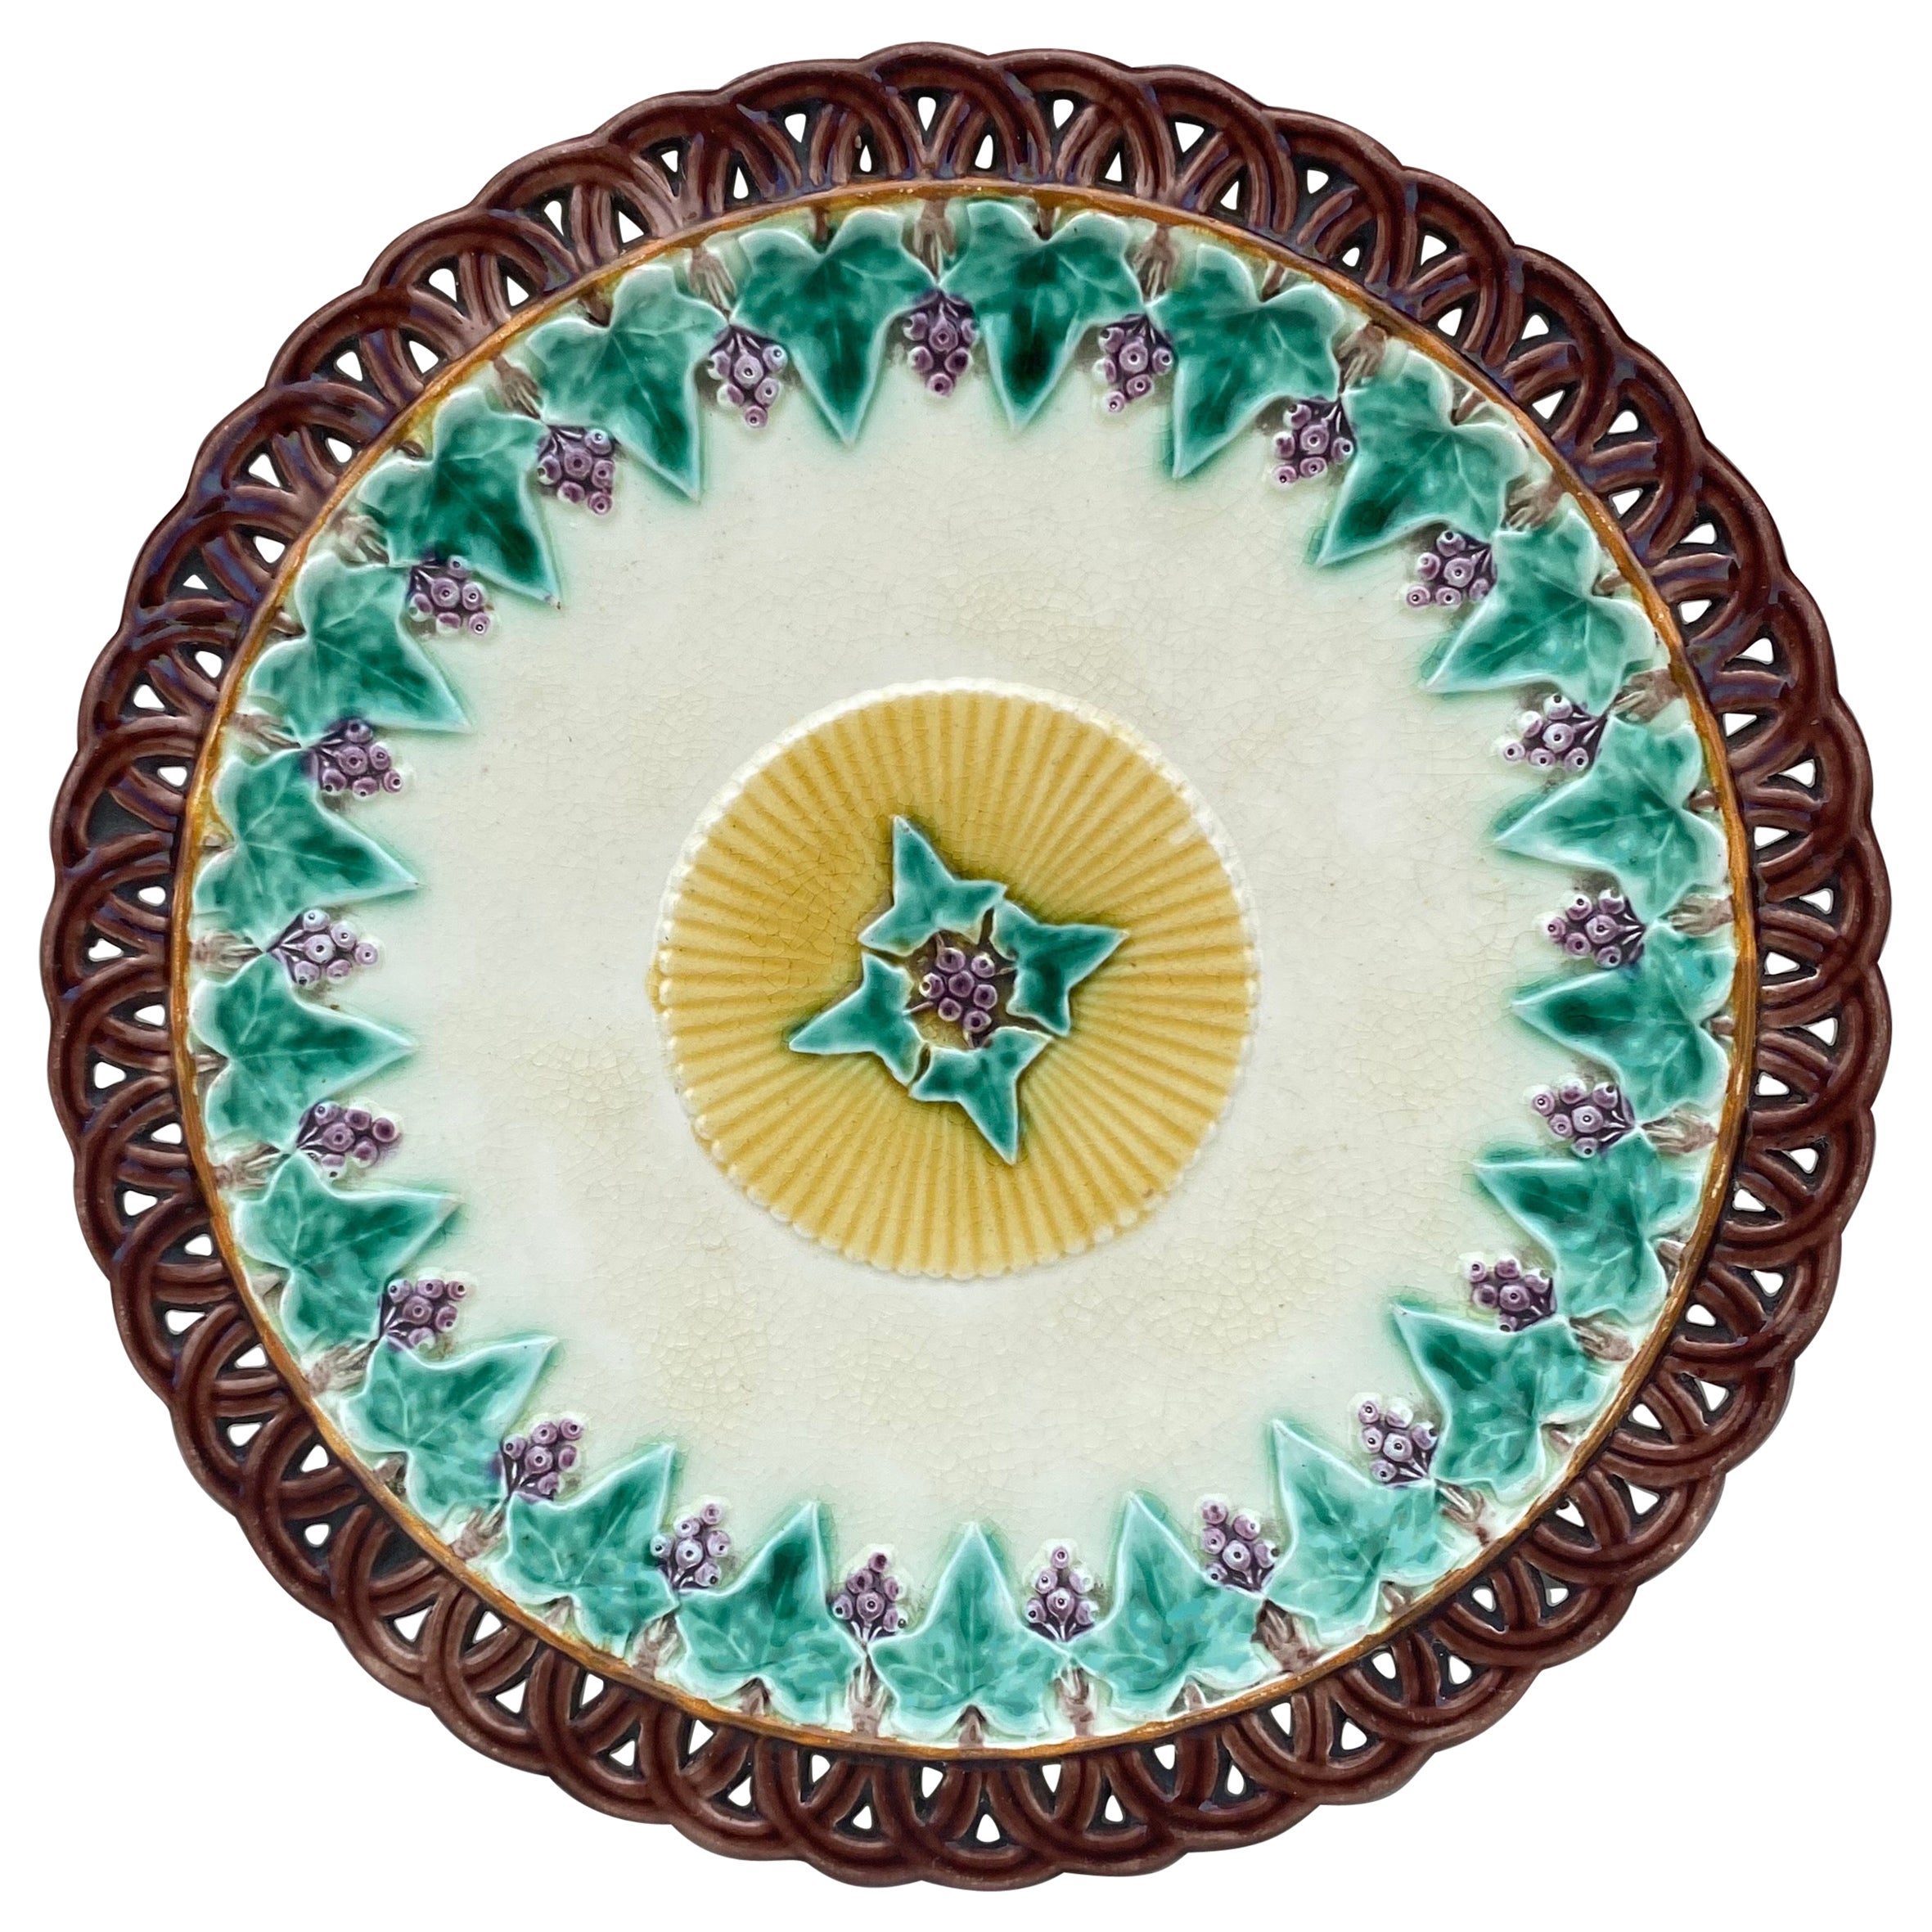 19th Century Wedgwood Majolica Reticulated Plate